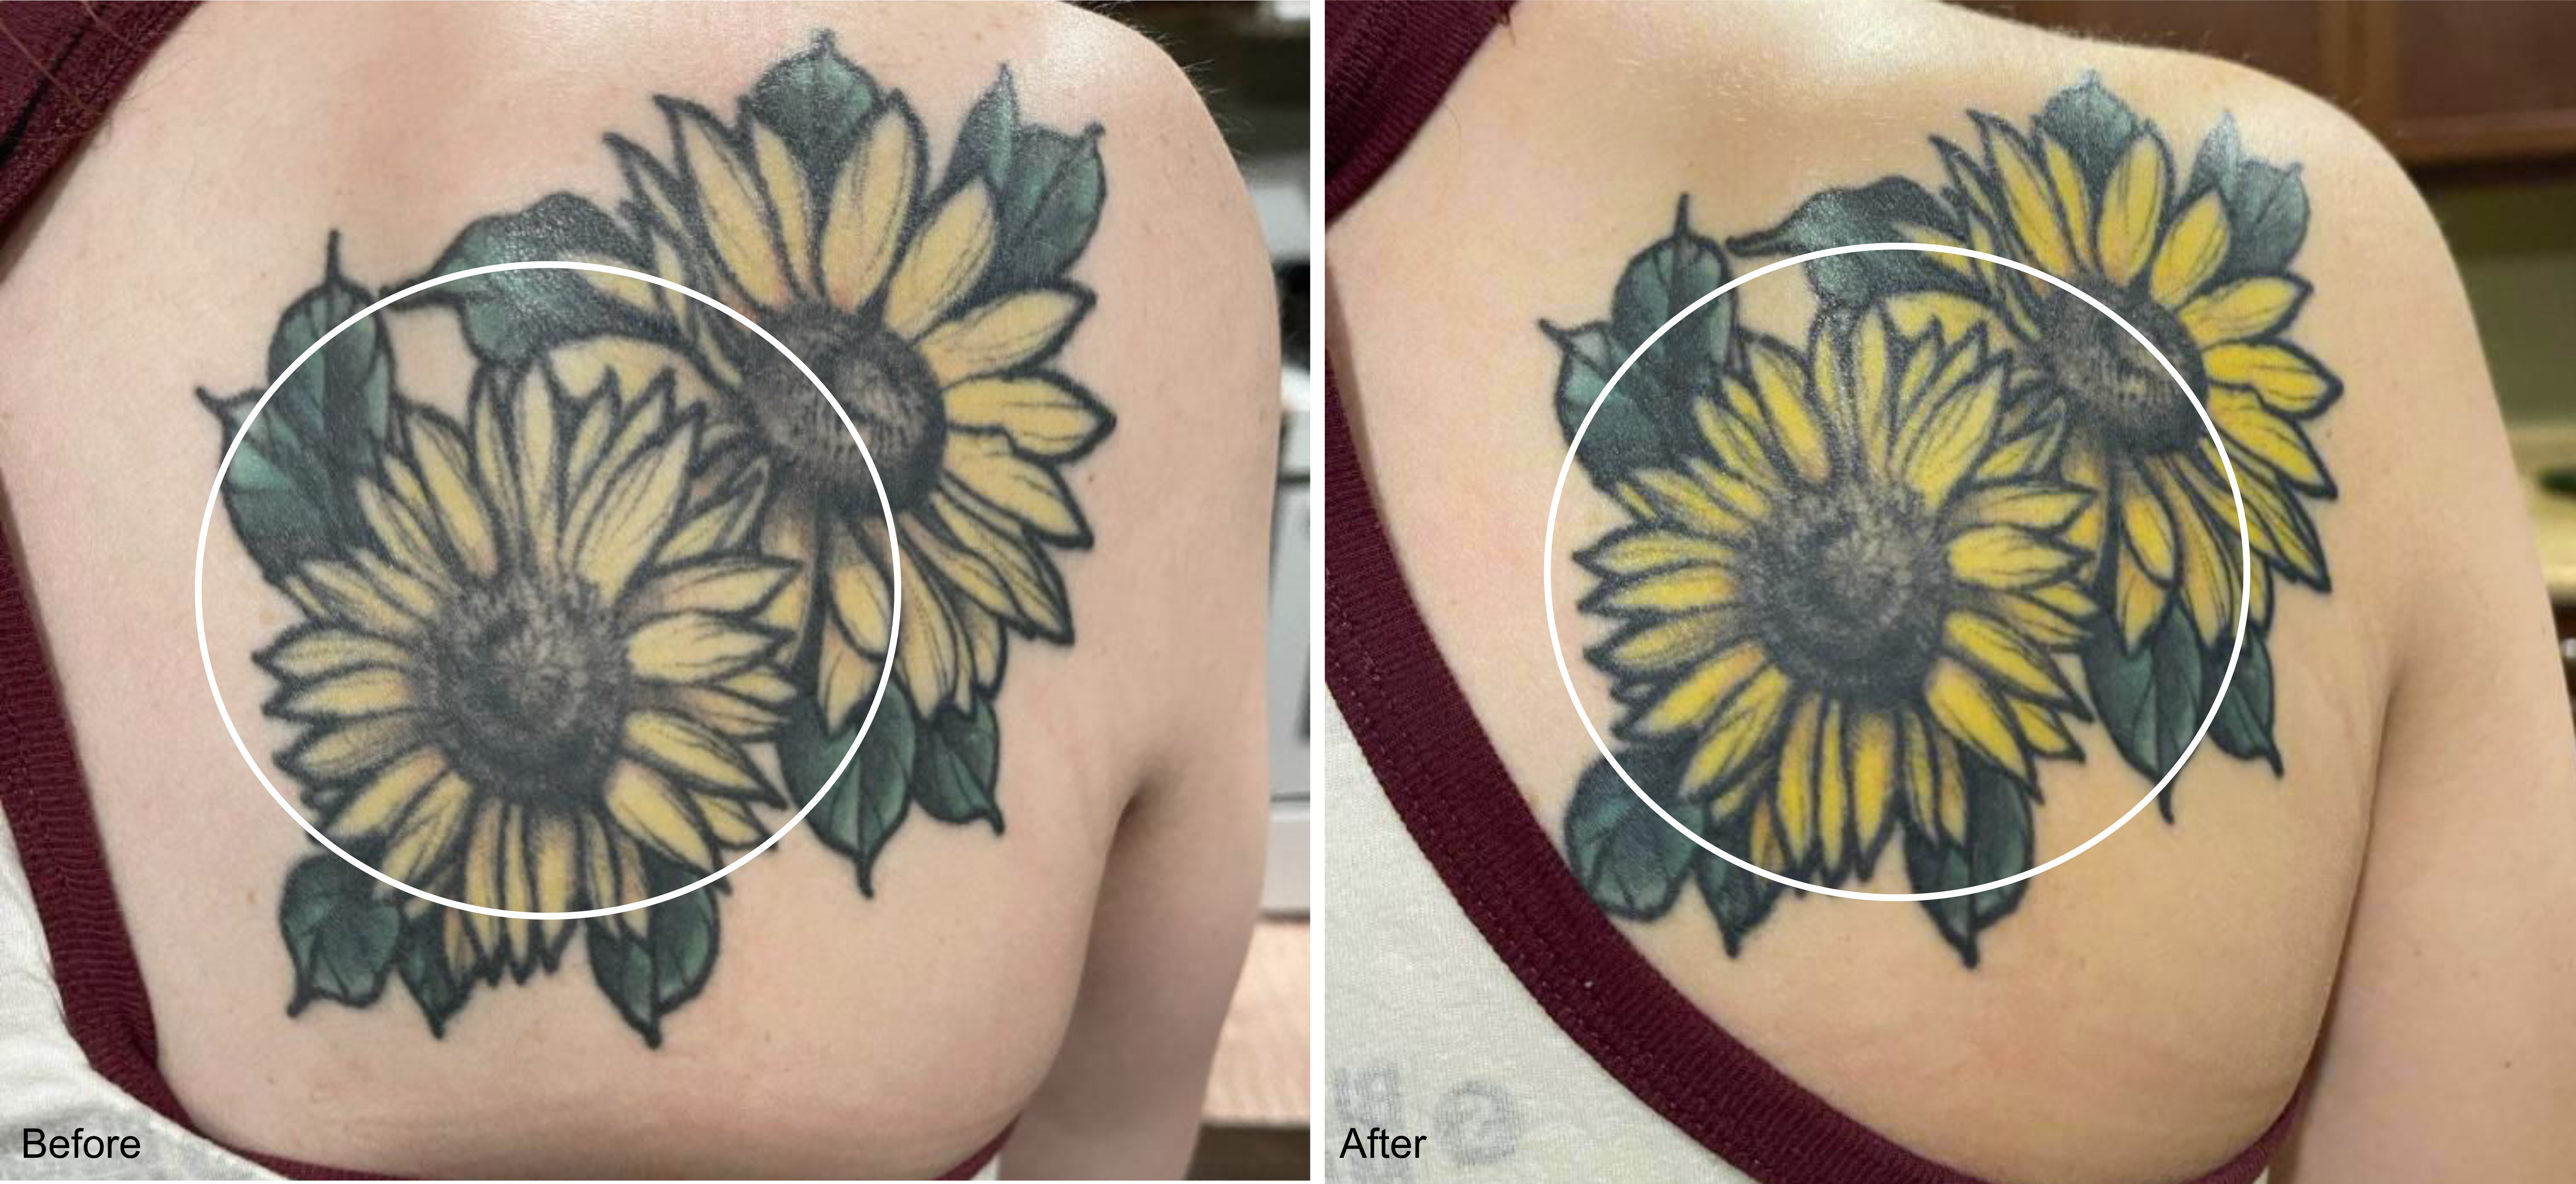 Poppy's Tattoo Before and After